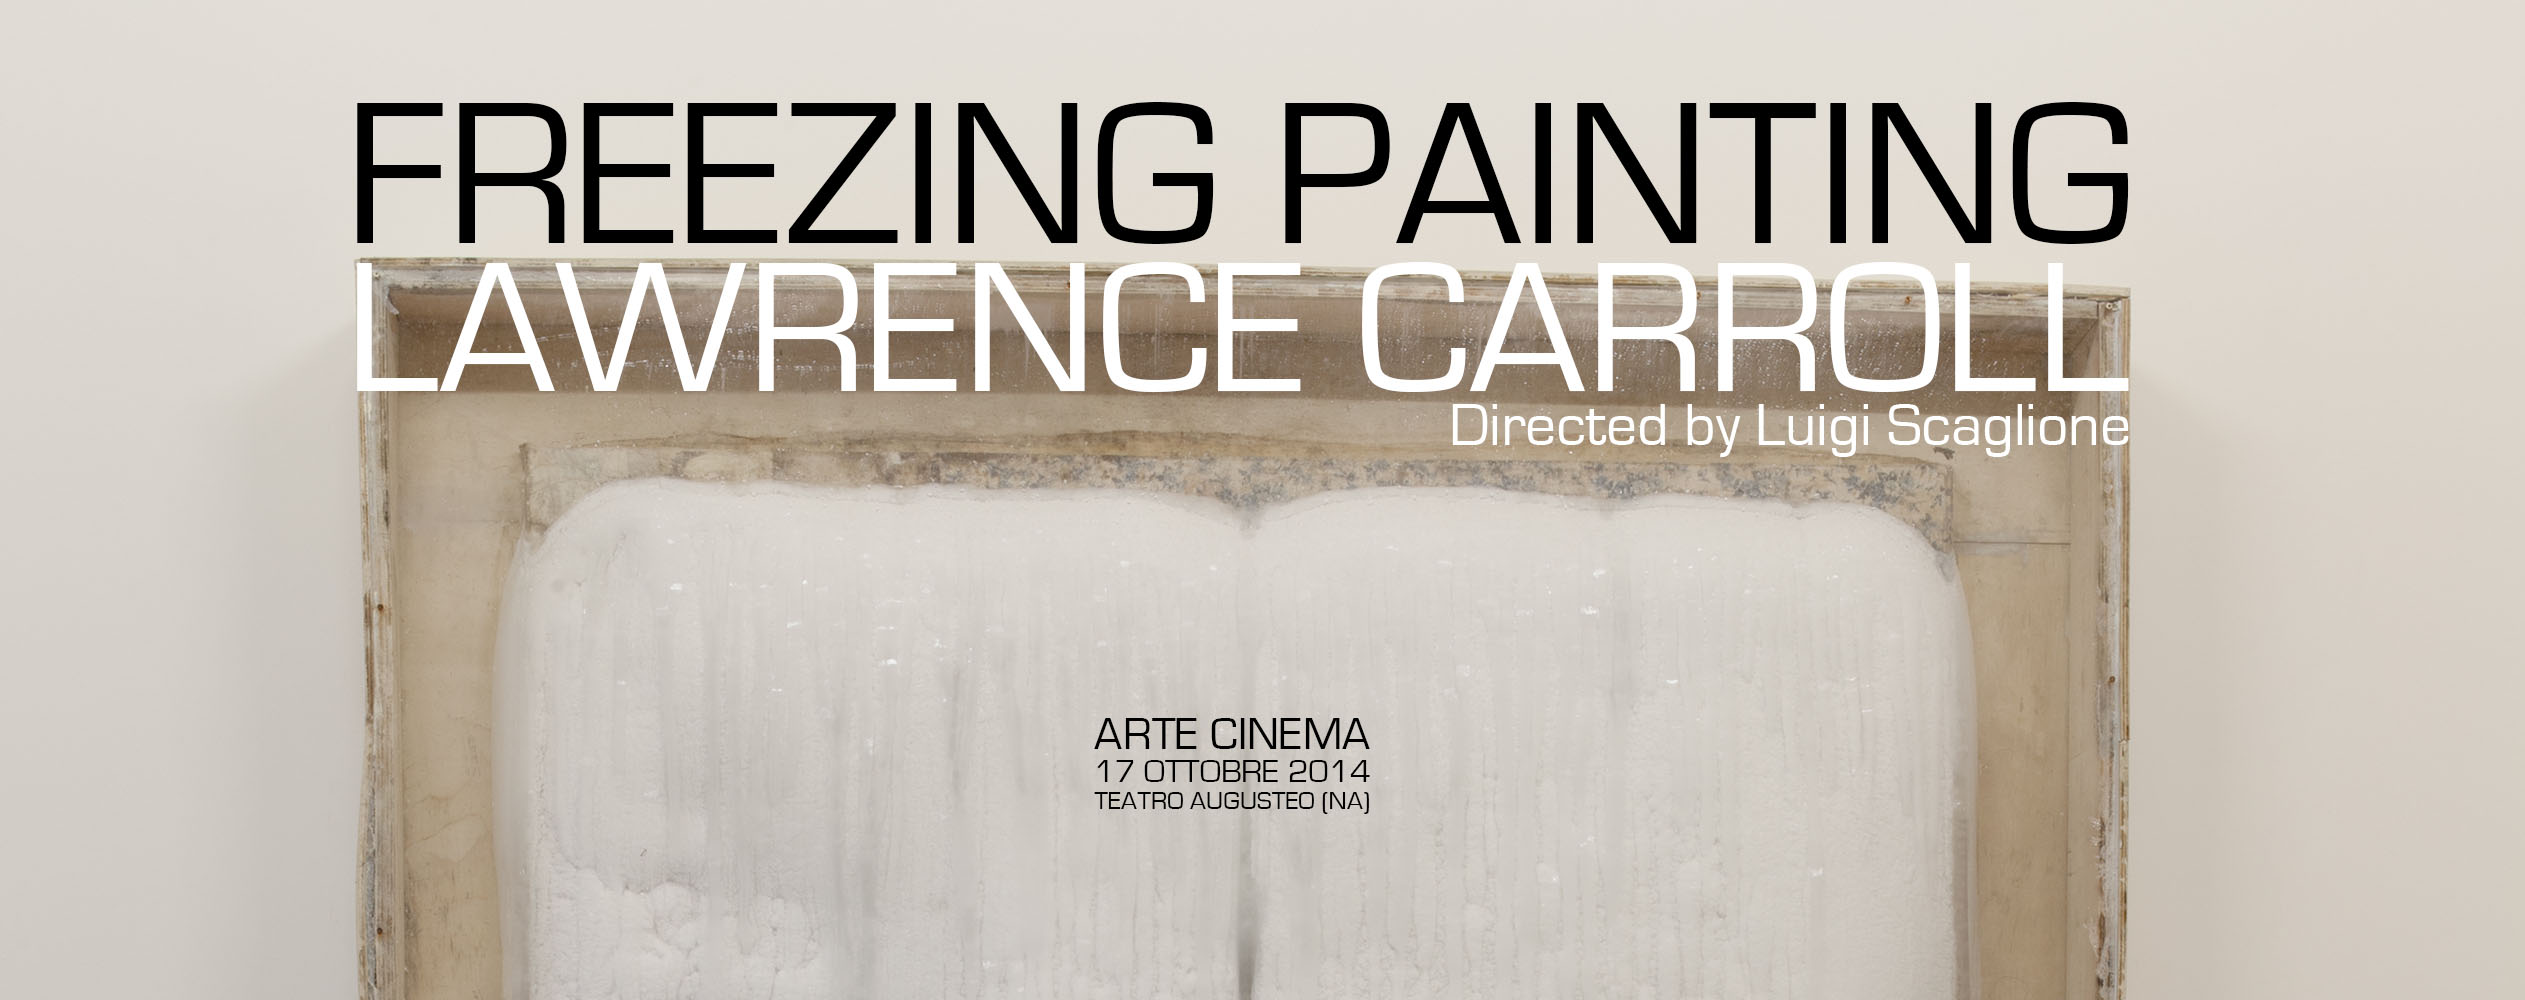 FREEZING PAINTING – LAWRENCE CARROLL – directed by Luigi Scaglione